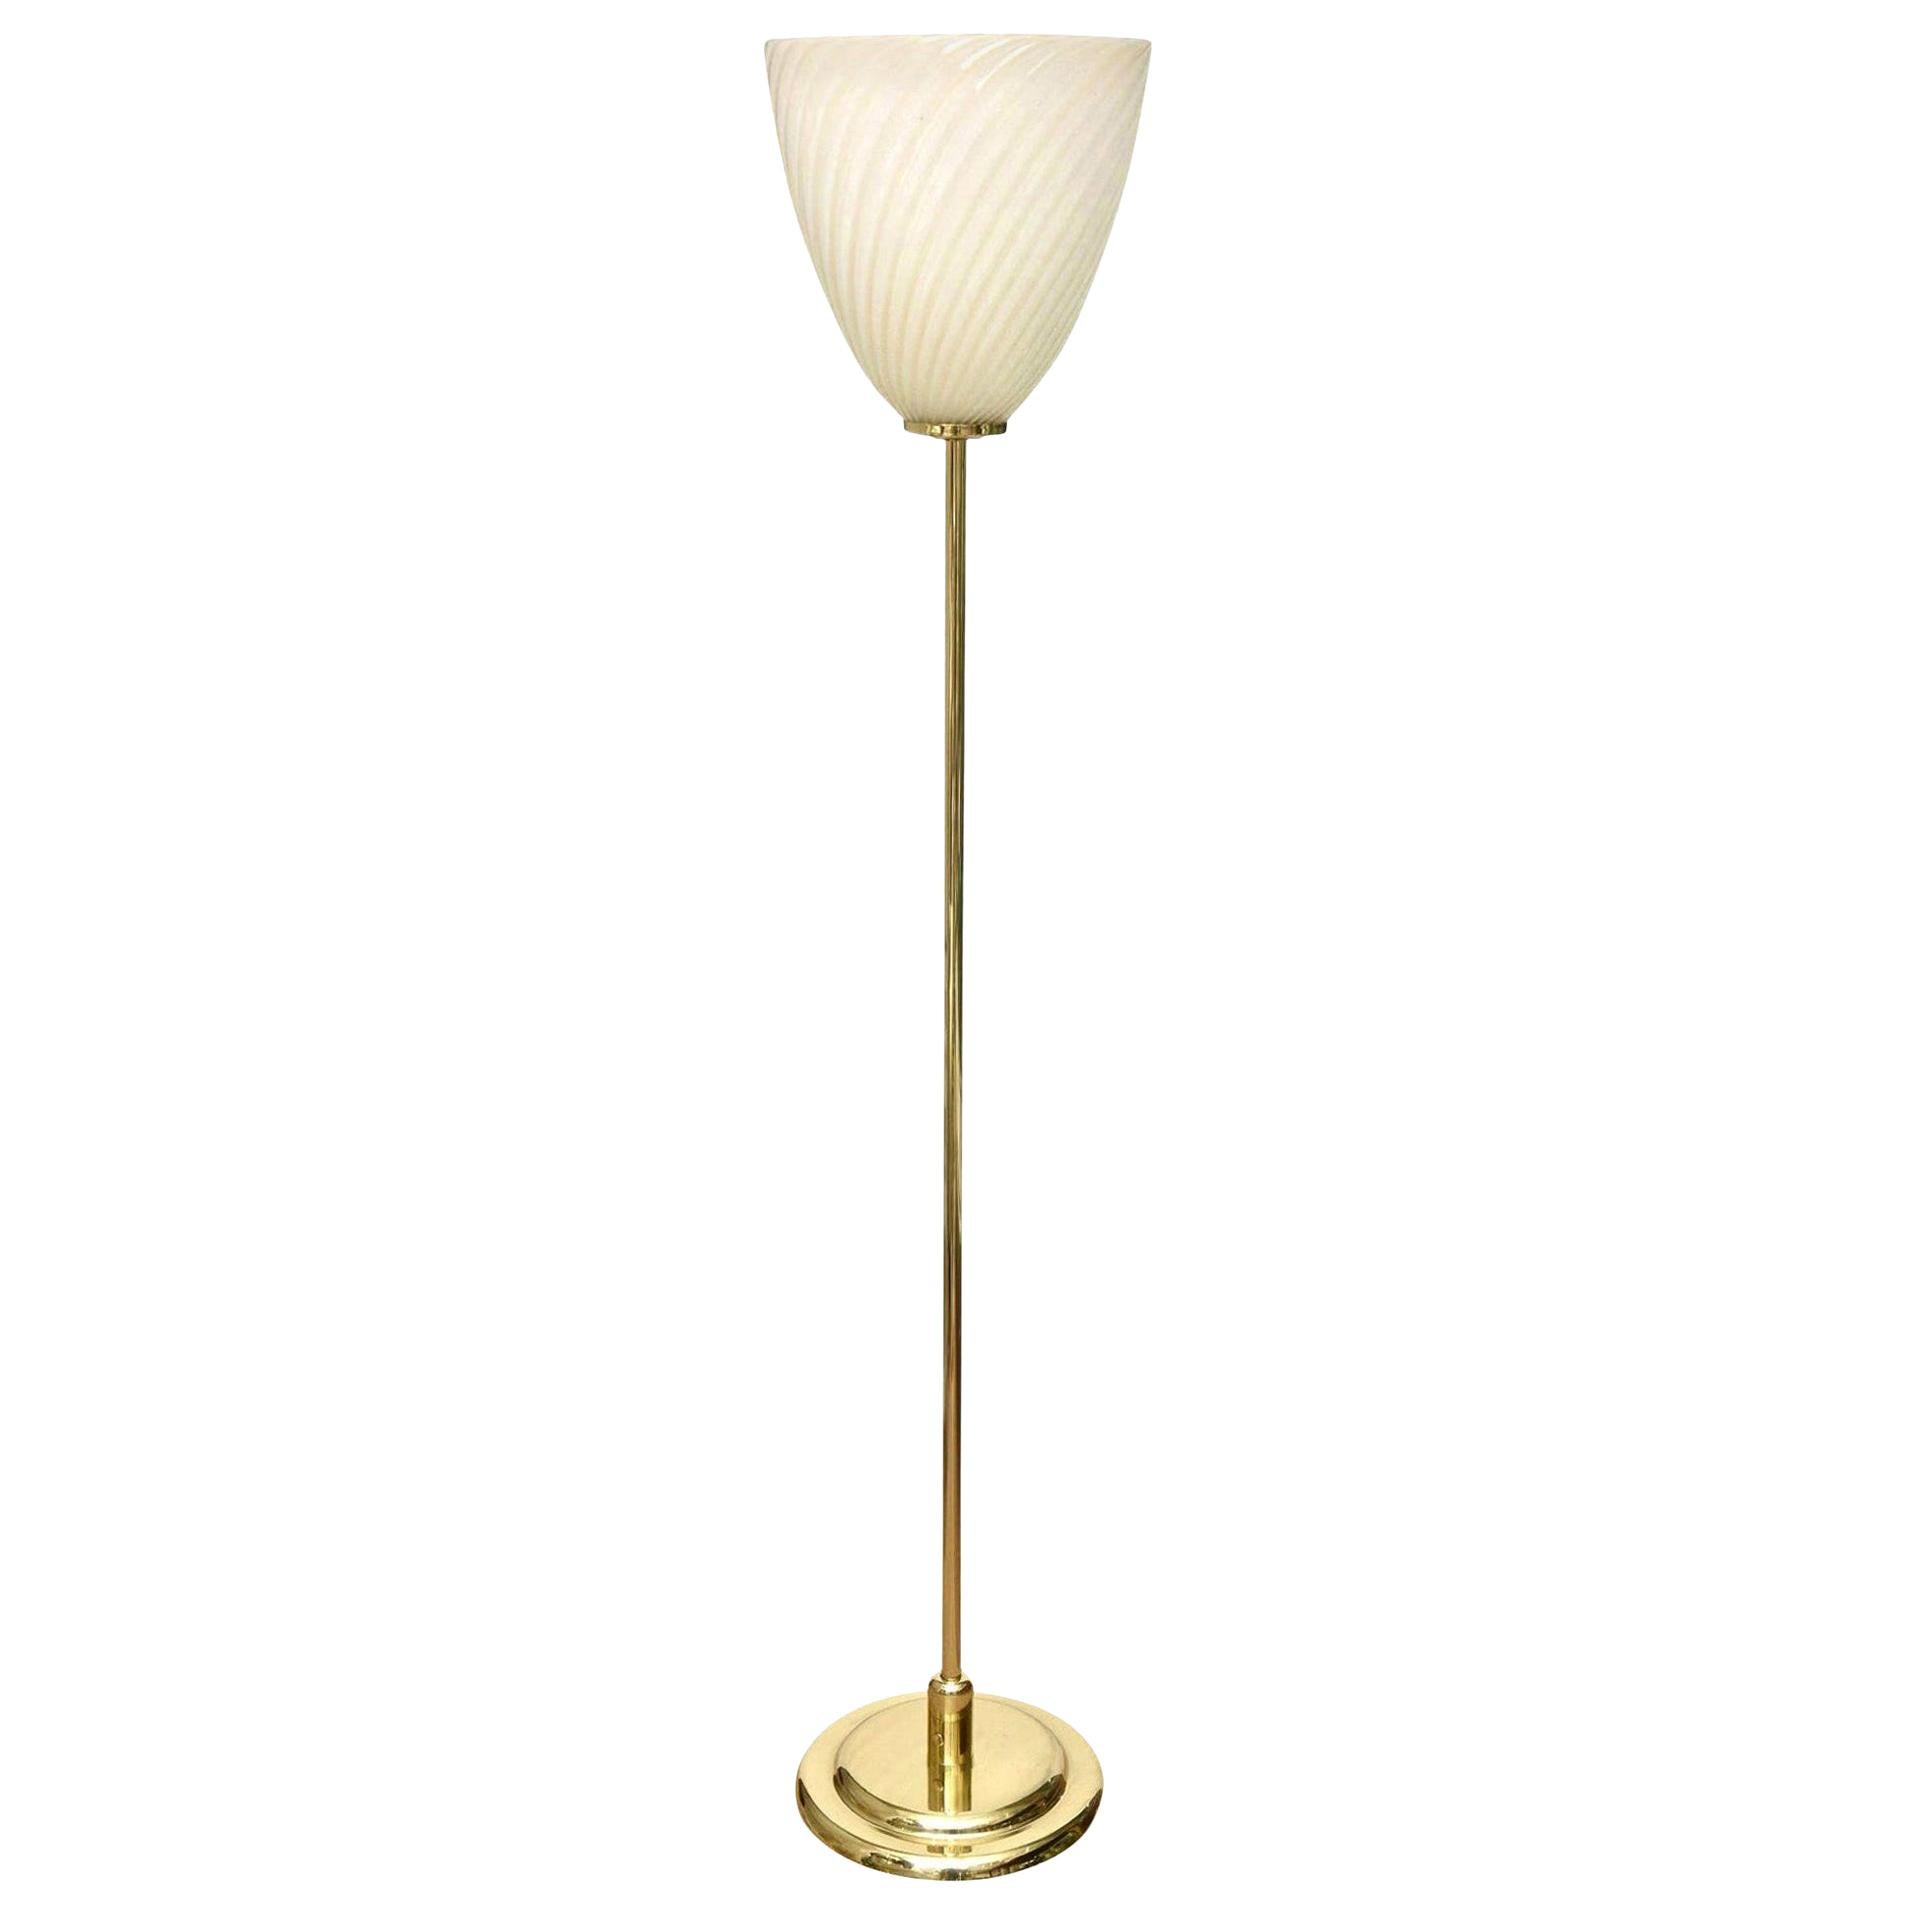 This Mid-Century Modern Italian Murano polished brass and glass floor lamp has a simplicity and elegance to it. It can go into any interior. The swirled hand blown original glass lamp shade has a beautiful warm romantic glow when lite as shown in